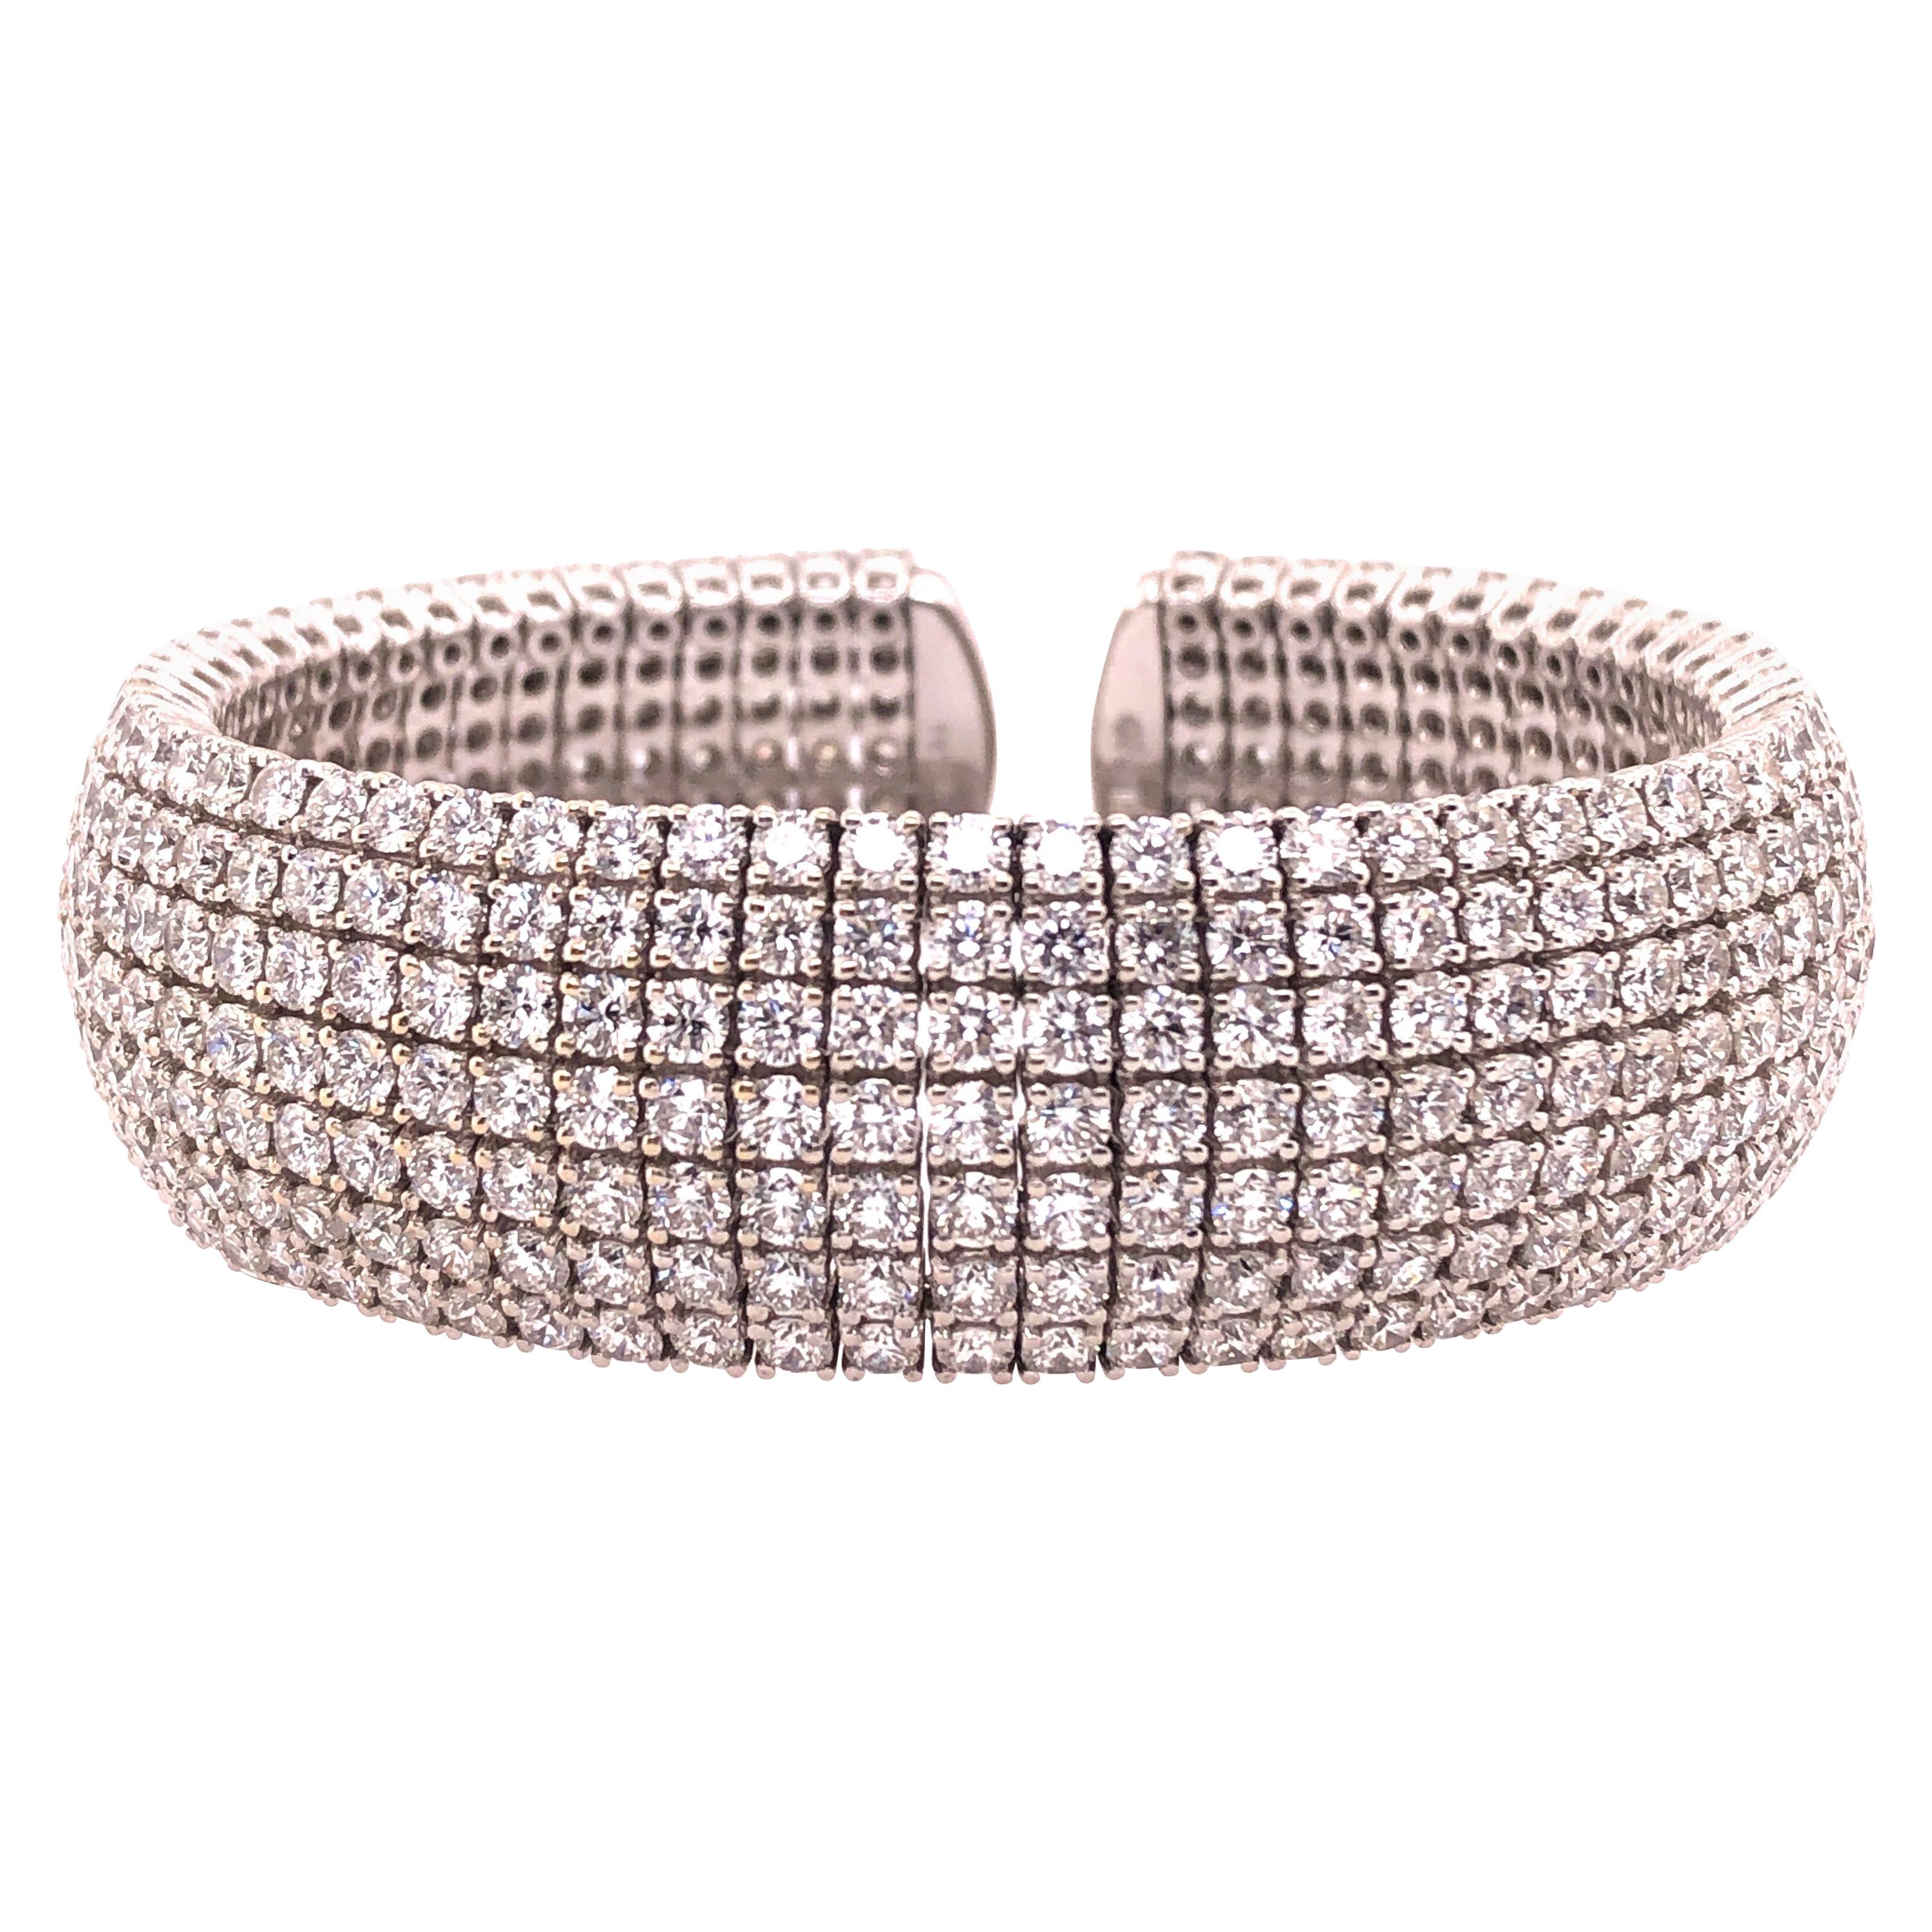 18 Karat White Gold and Diamond Cuff Bracelet Weighing Approx 32.89 Carat For Sale